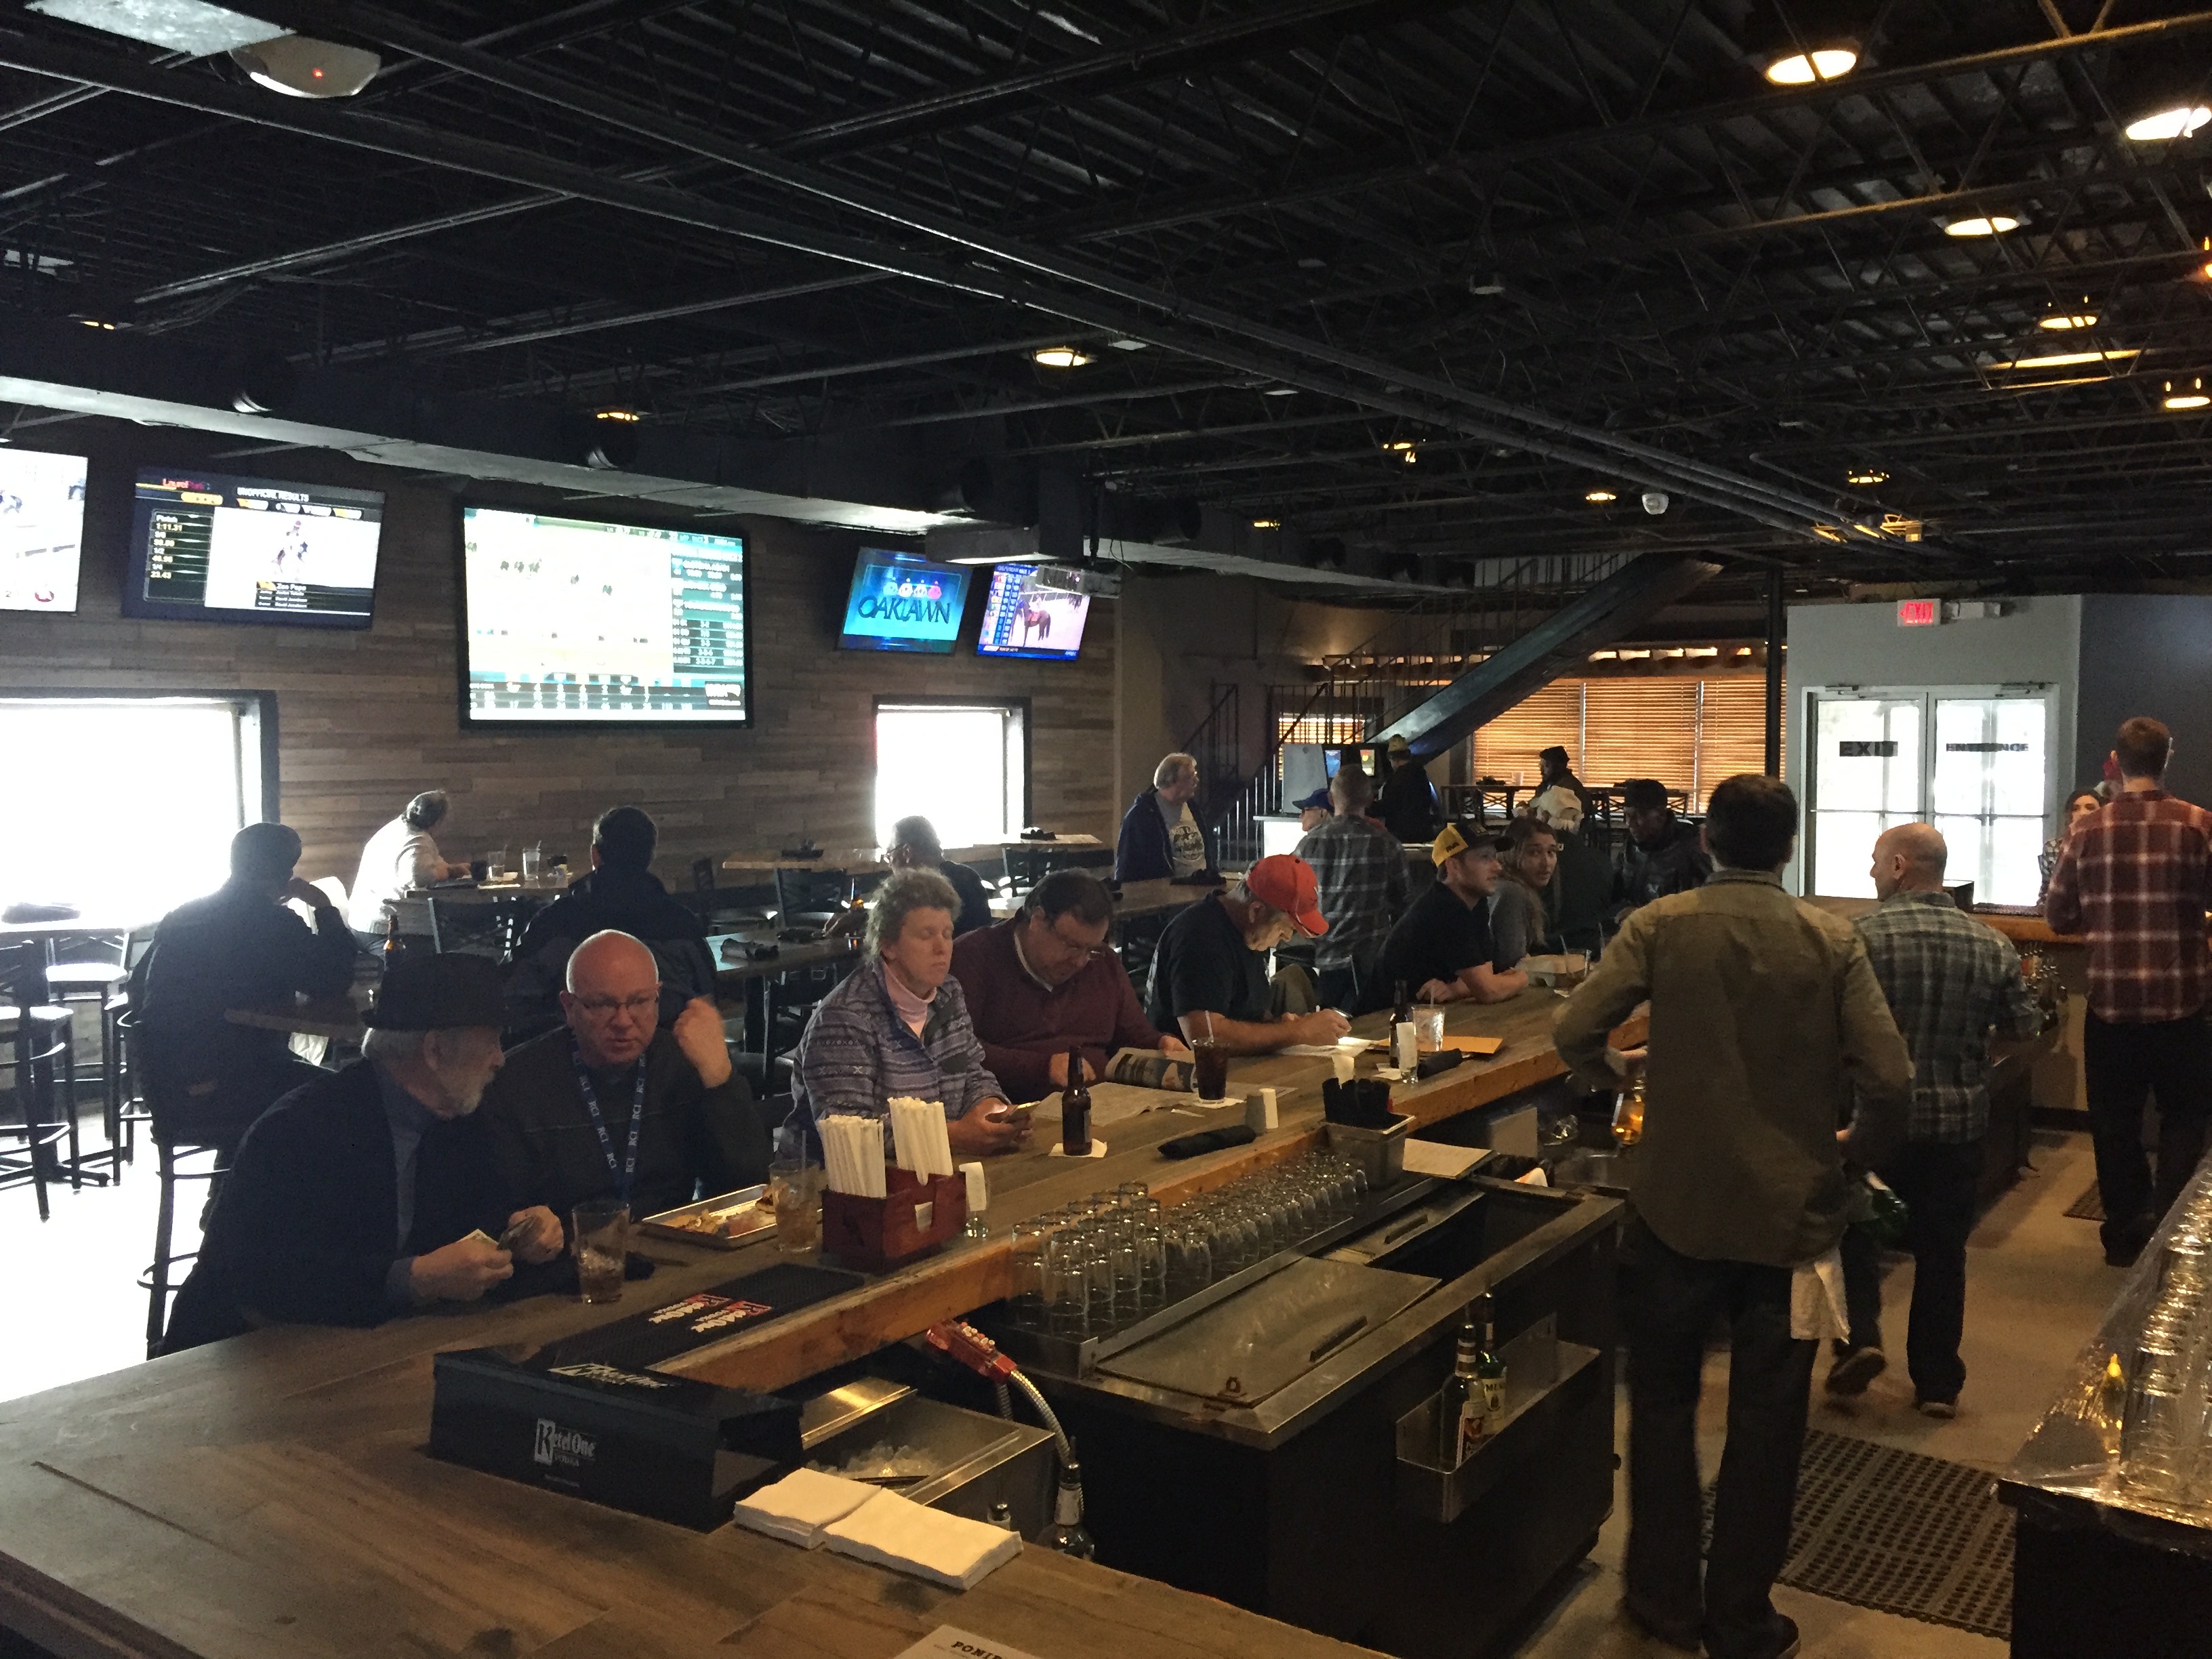 The OTB at Ponies & Pints handled over $668,000 in the month of February.